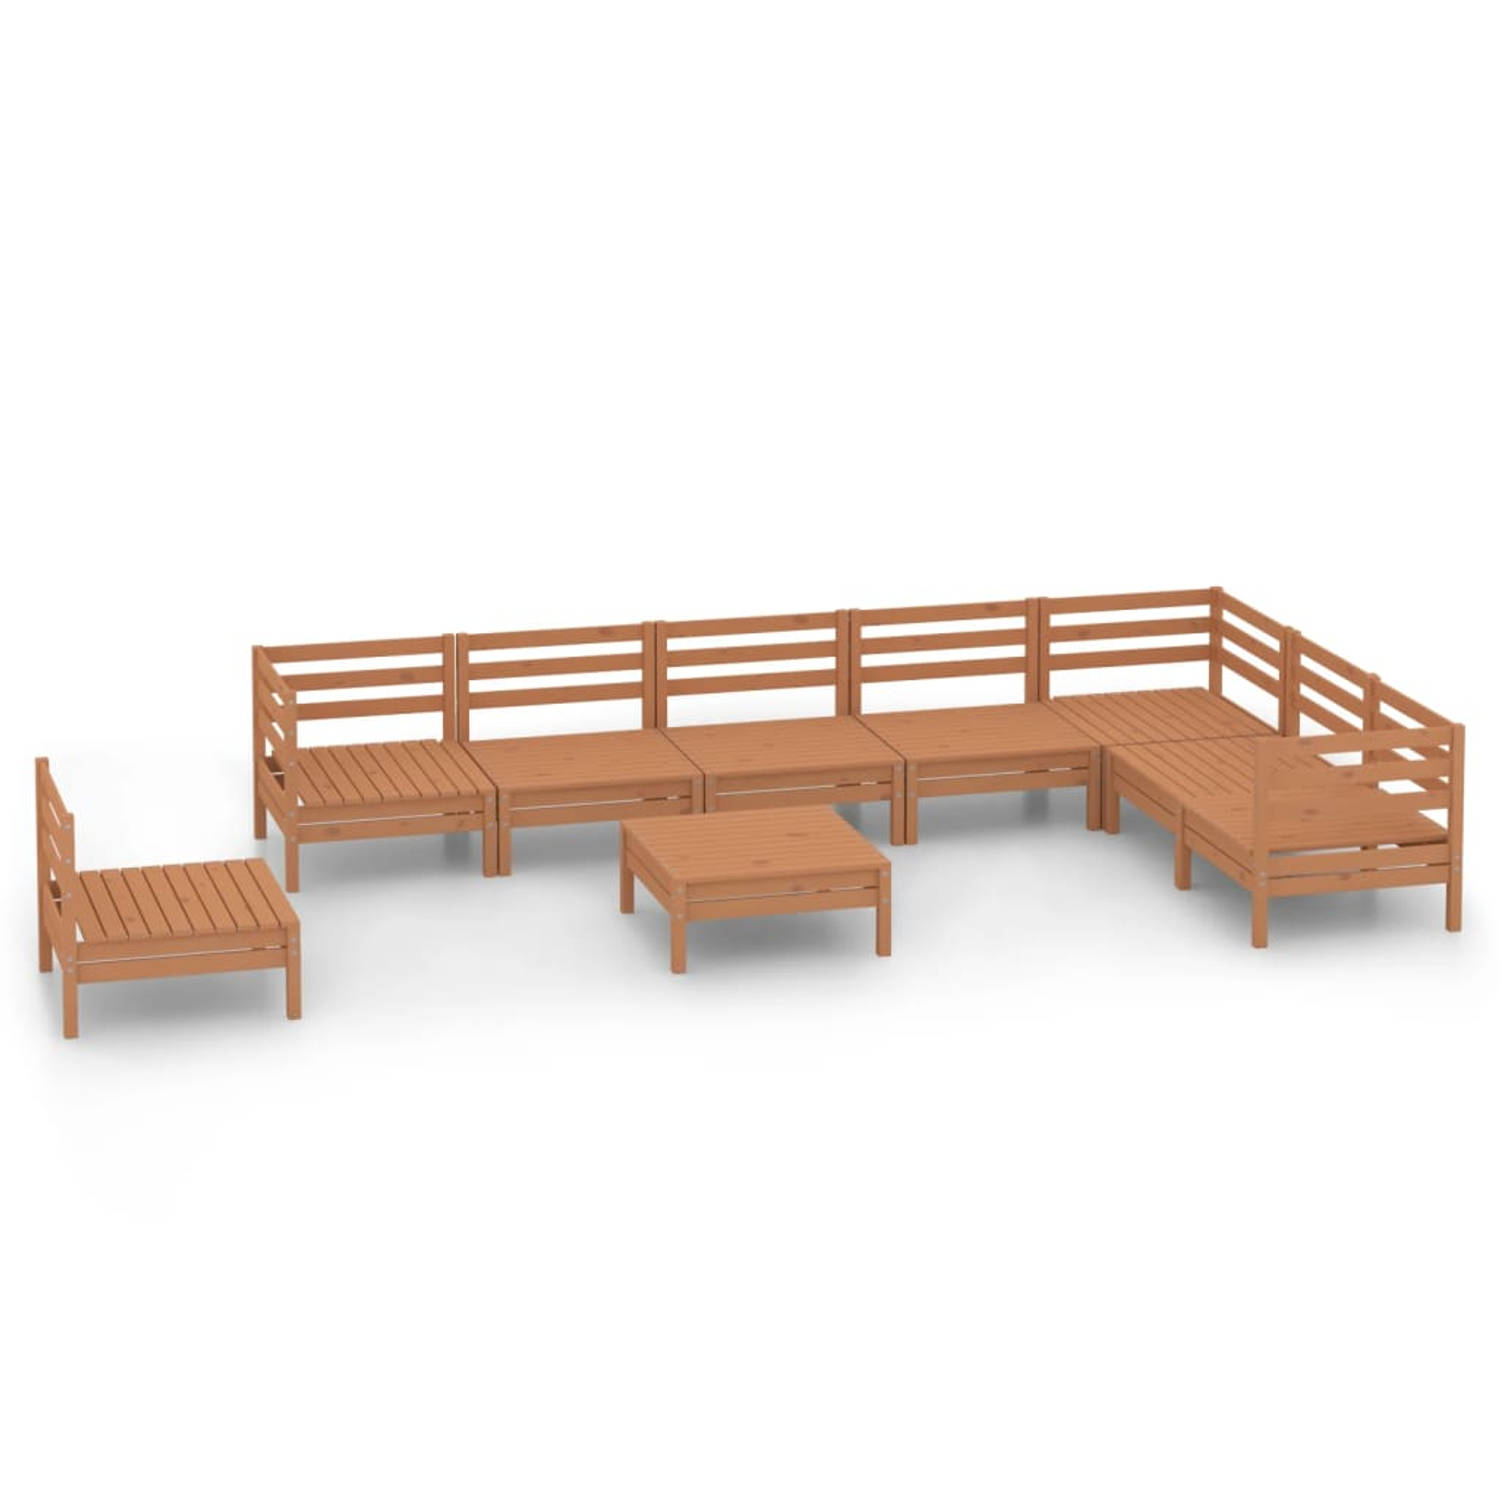 The Living Store 9-delige Loungeset massief grenenhout honingbruin - Tuinset